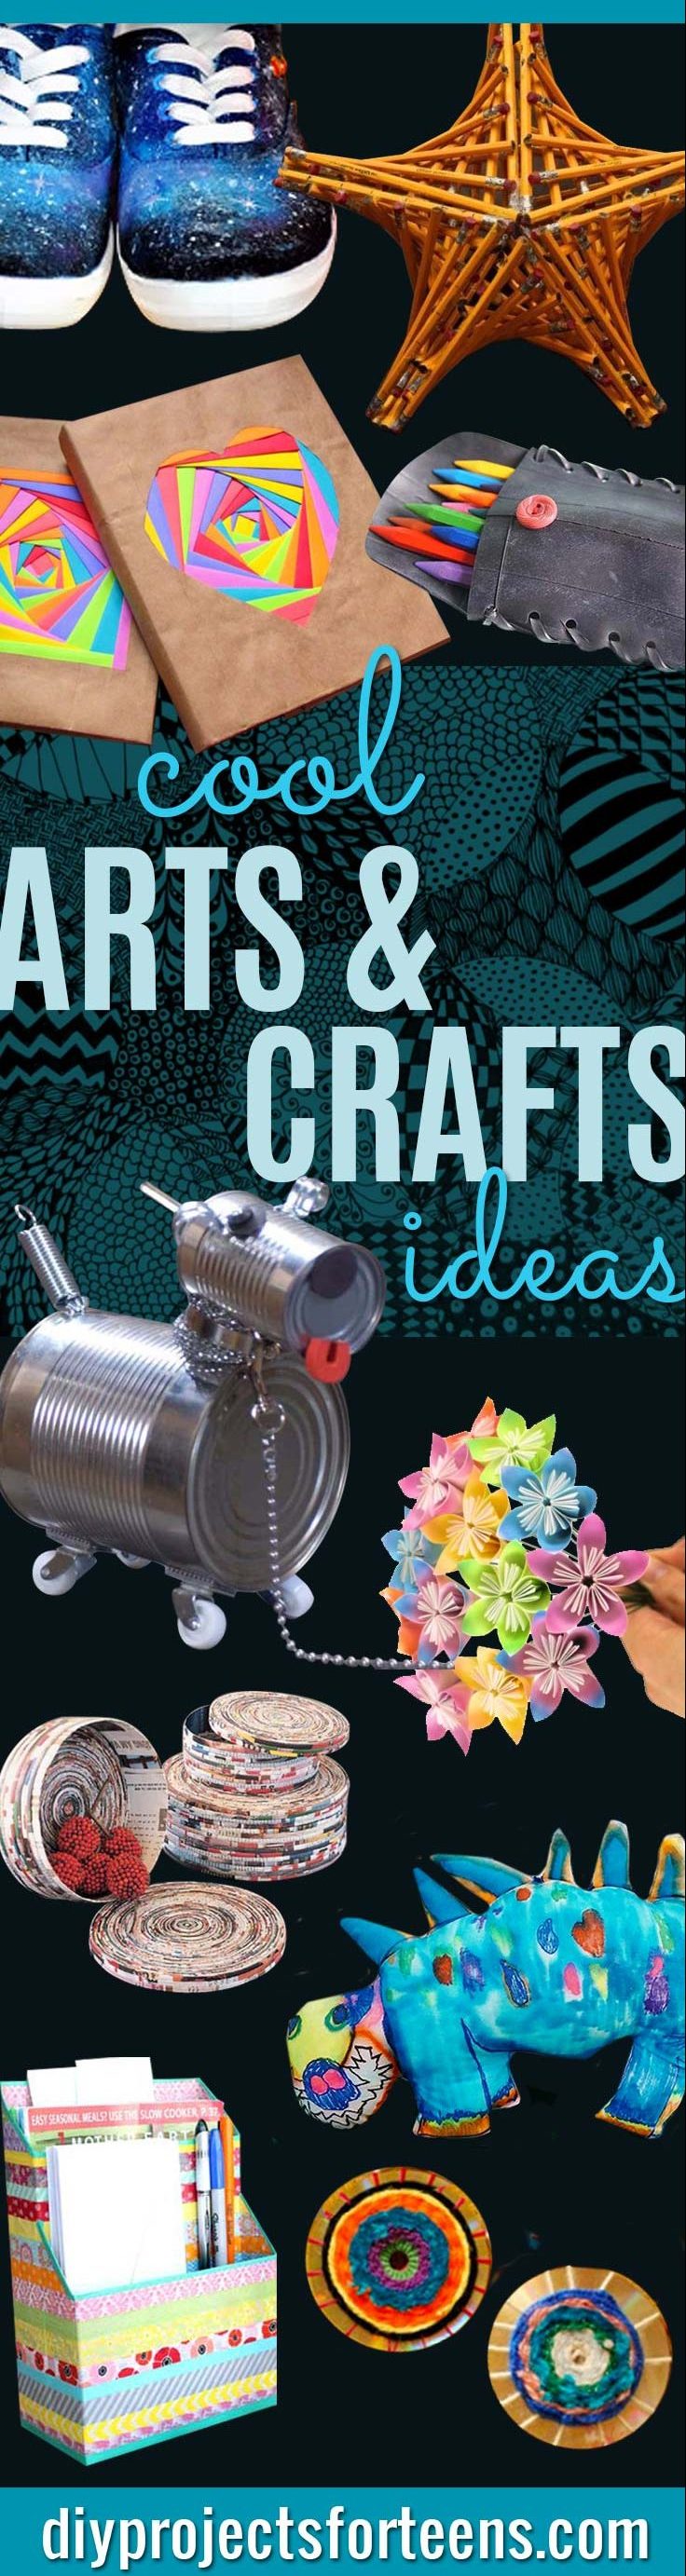 Cool Arts and Crafts Ideas for Teens, Kids and Even Adults | Cheap, Fun and Easy DIY Projects, Awesome Craft Tutorials for Teenagers | School, Home, Room Decor and Awesome Gift Ideas #artsandcrafts #art #teencrafts #crafts